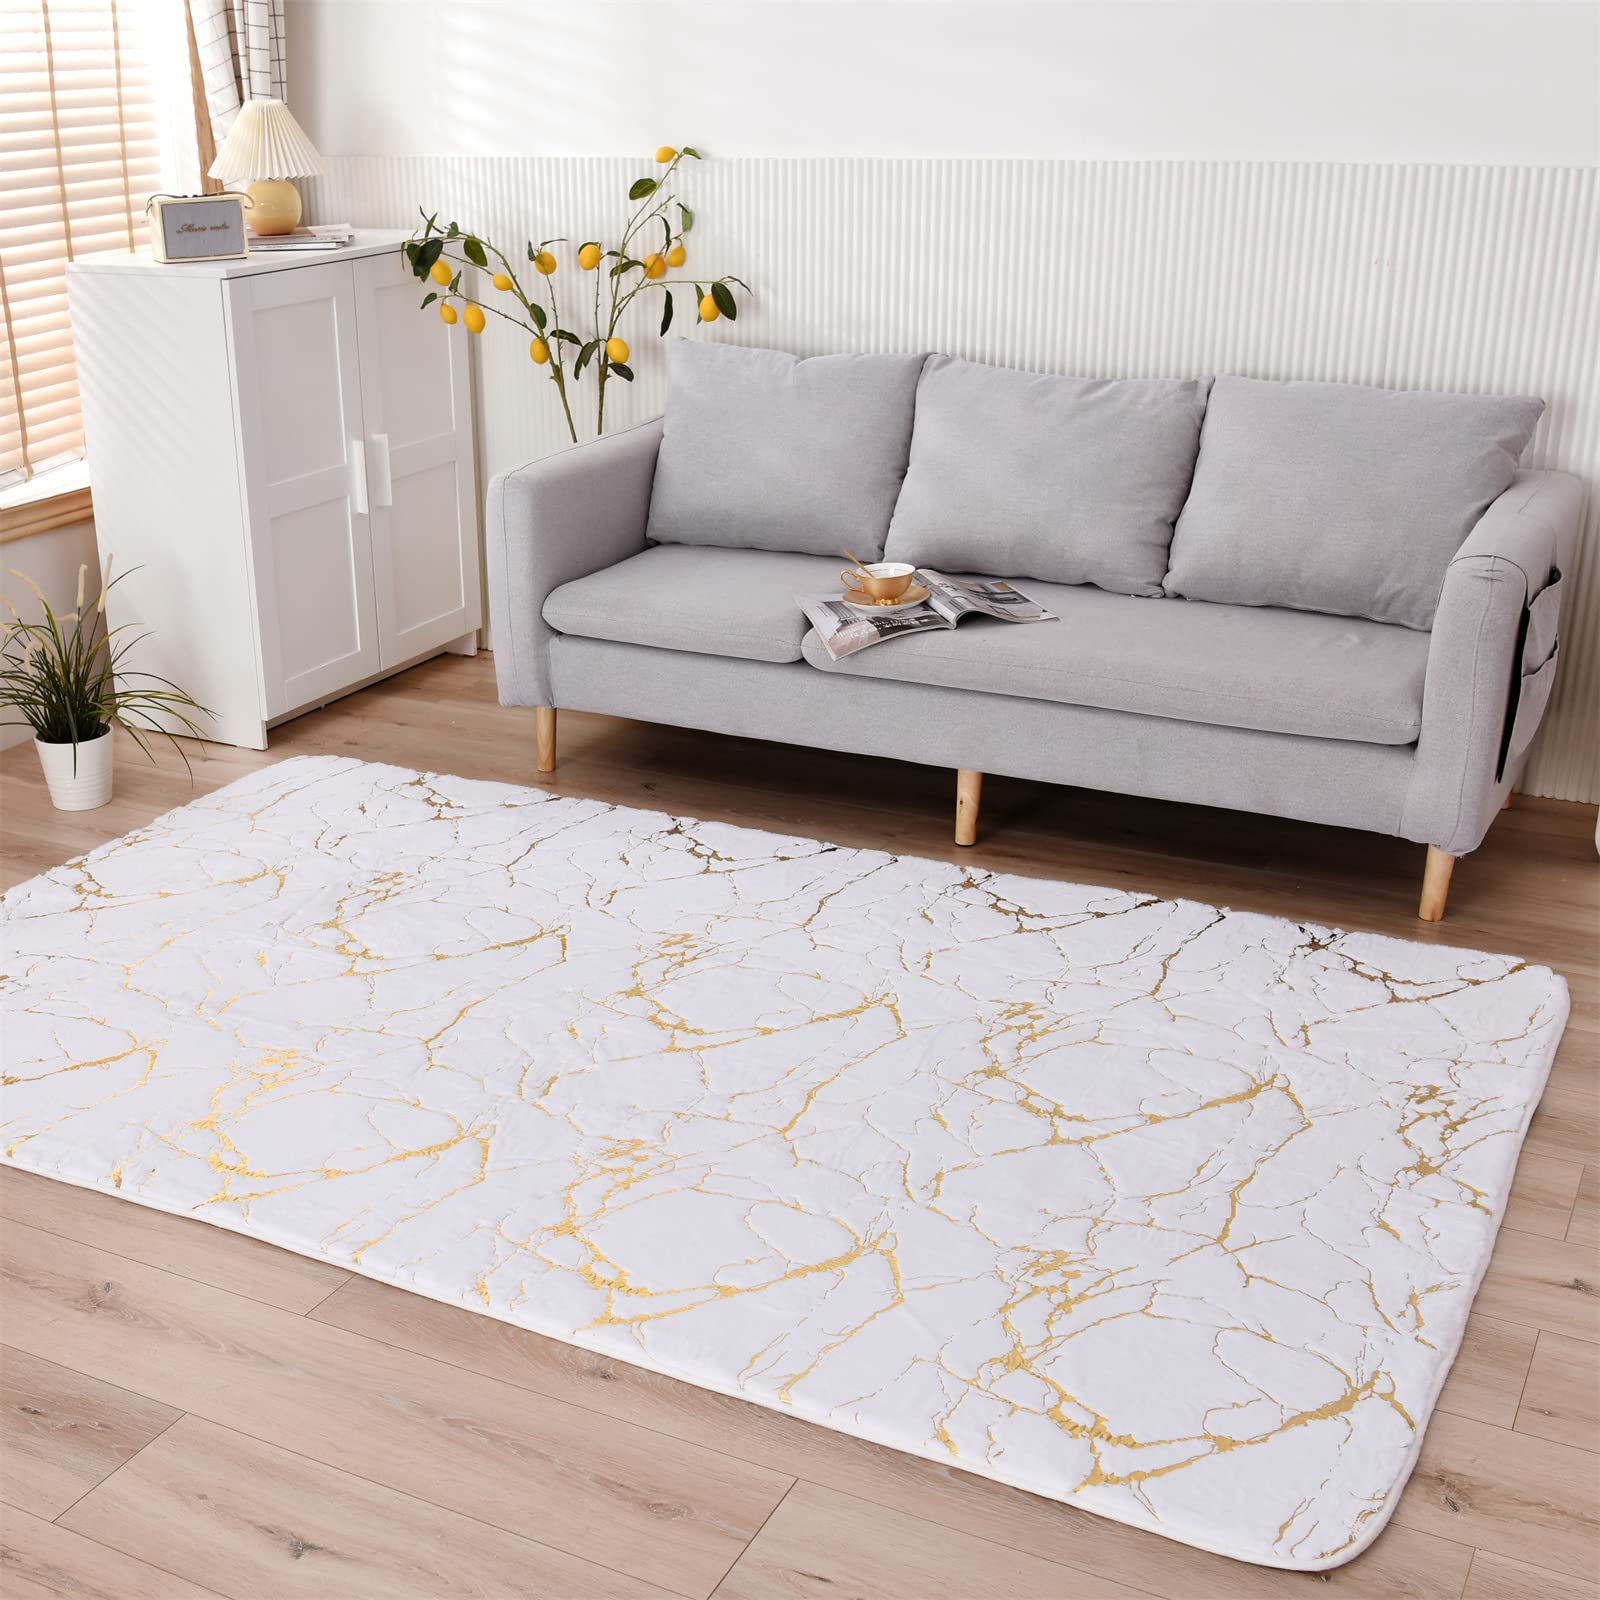 Gold Foil Faux Fur Rug Soft Fluffy Plush Modern Colorful Abstract Faux Rabbit Fur Mat Featured Image